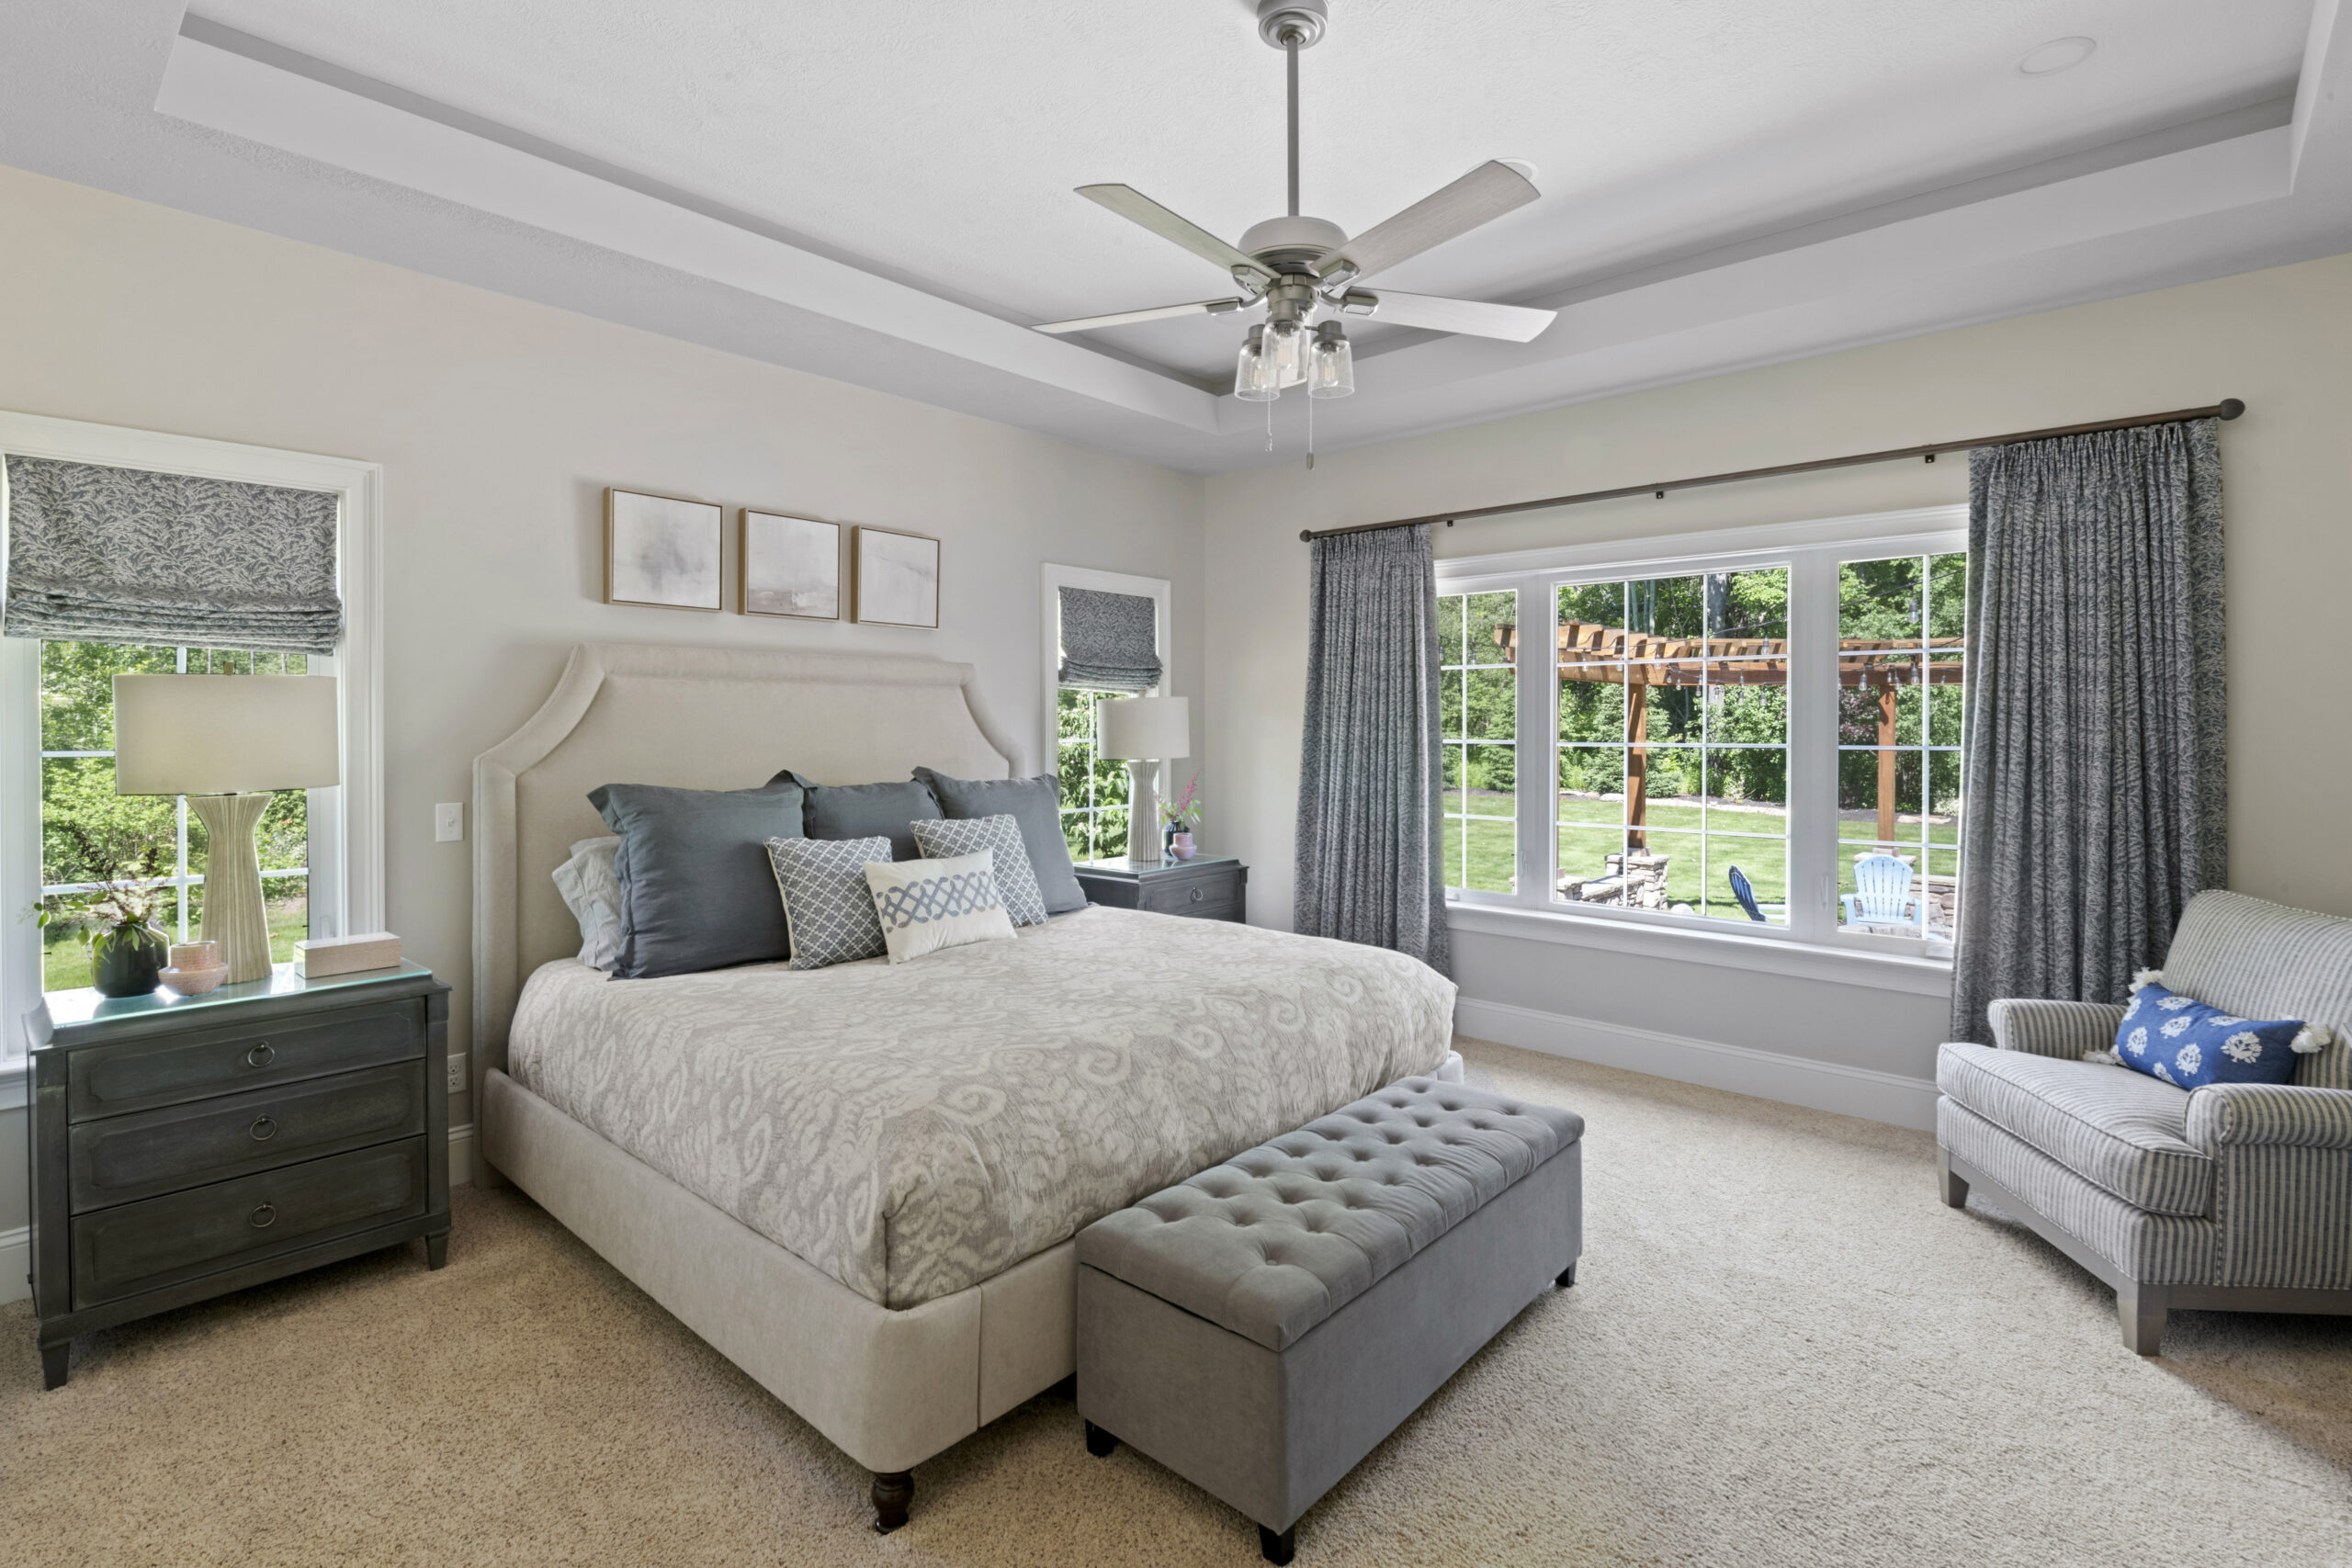 View of bedroom with grayish blue accent colors within bedding, nightstands, and curtains.